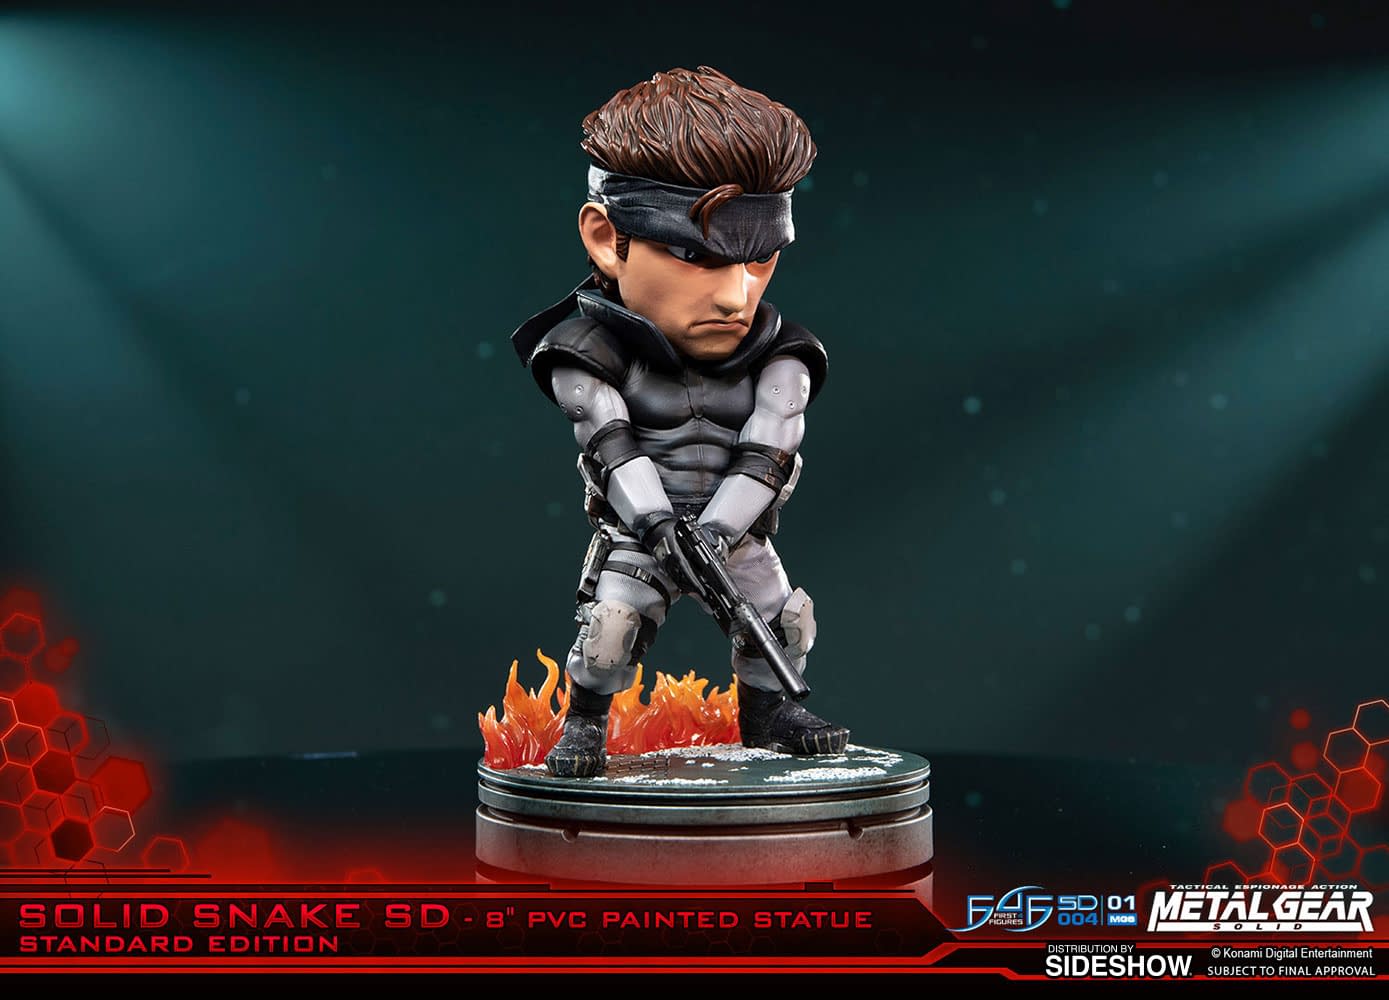 Solid Snake Returns with New "Metal Gear Solid" First 4 Figures Statue